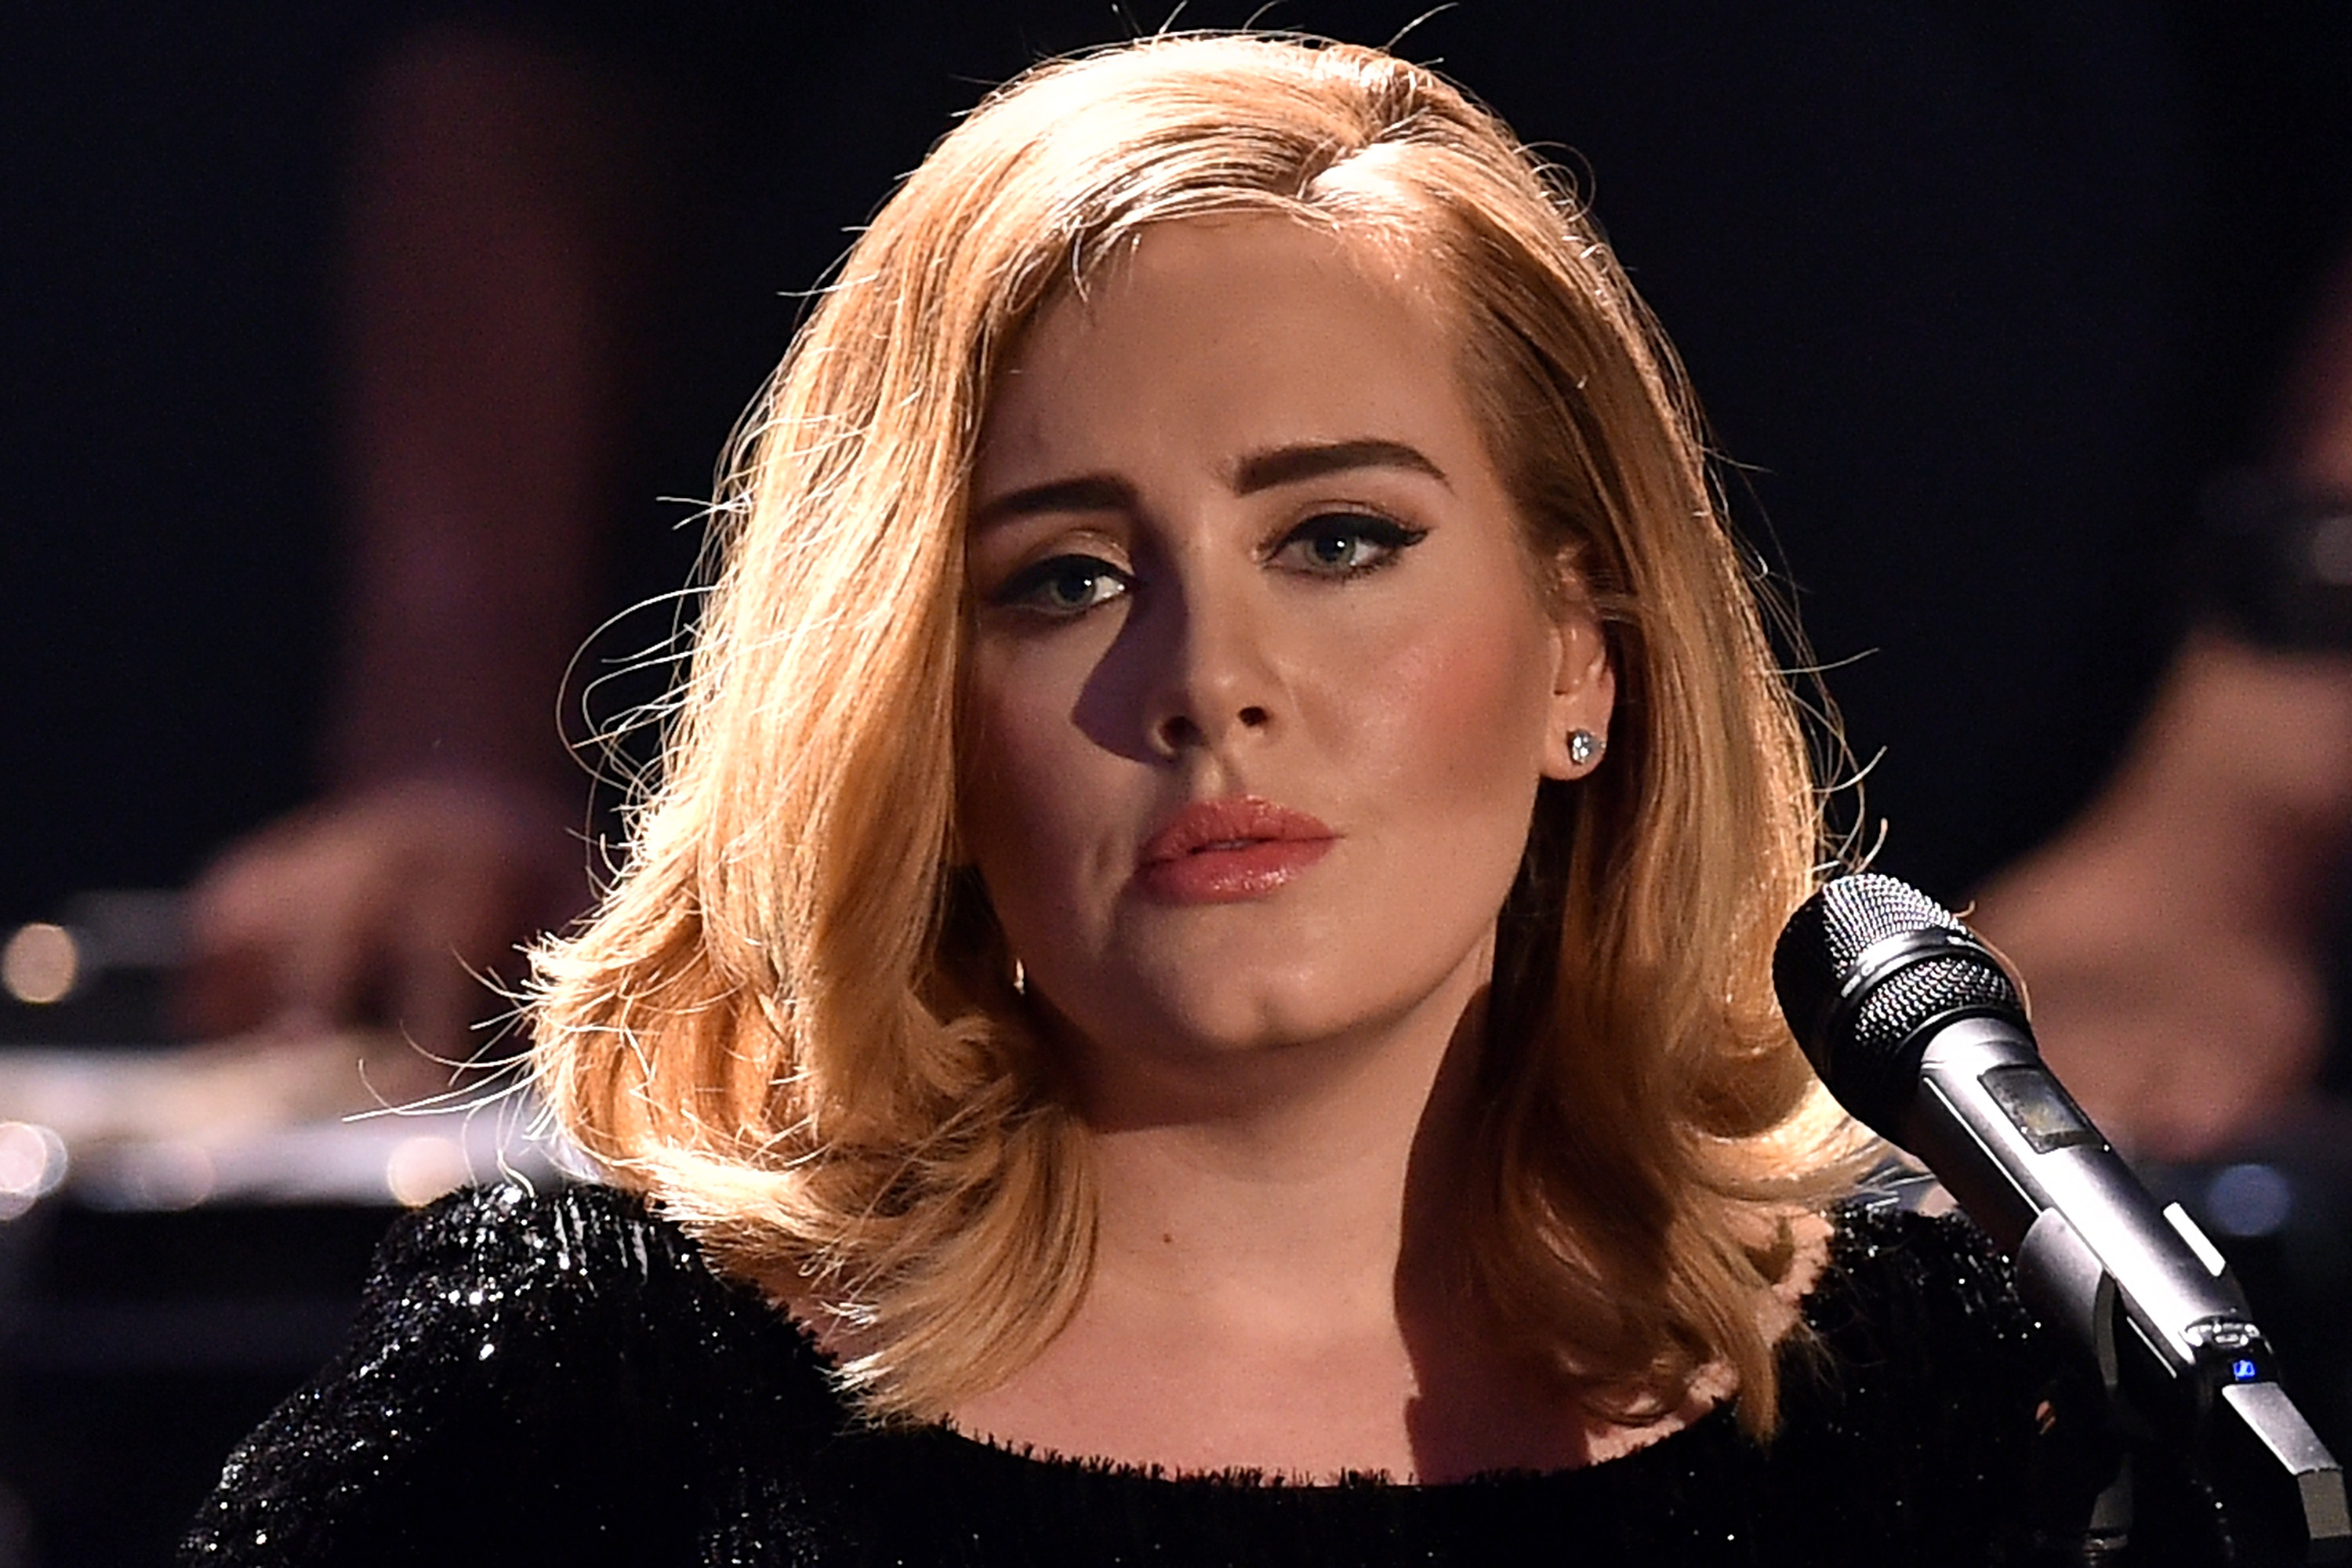 What's next for Adele?